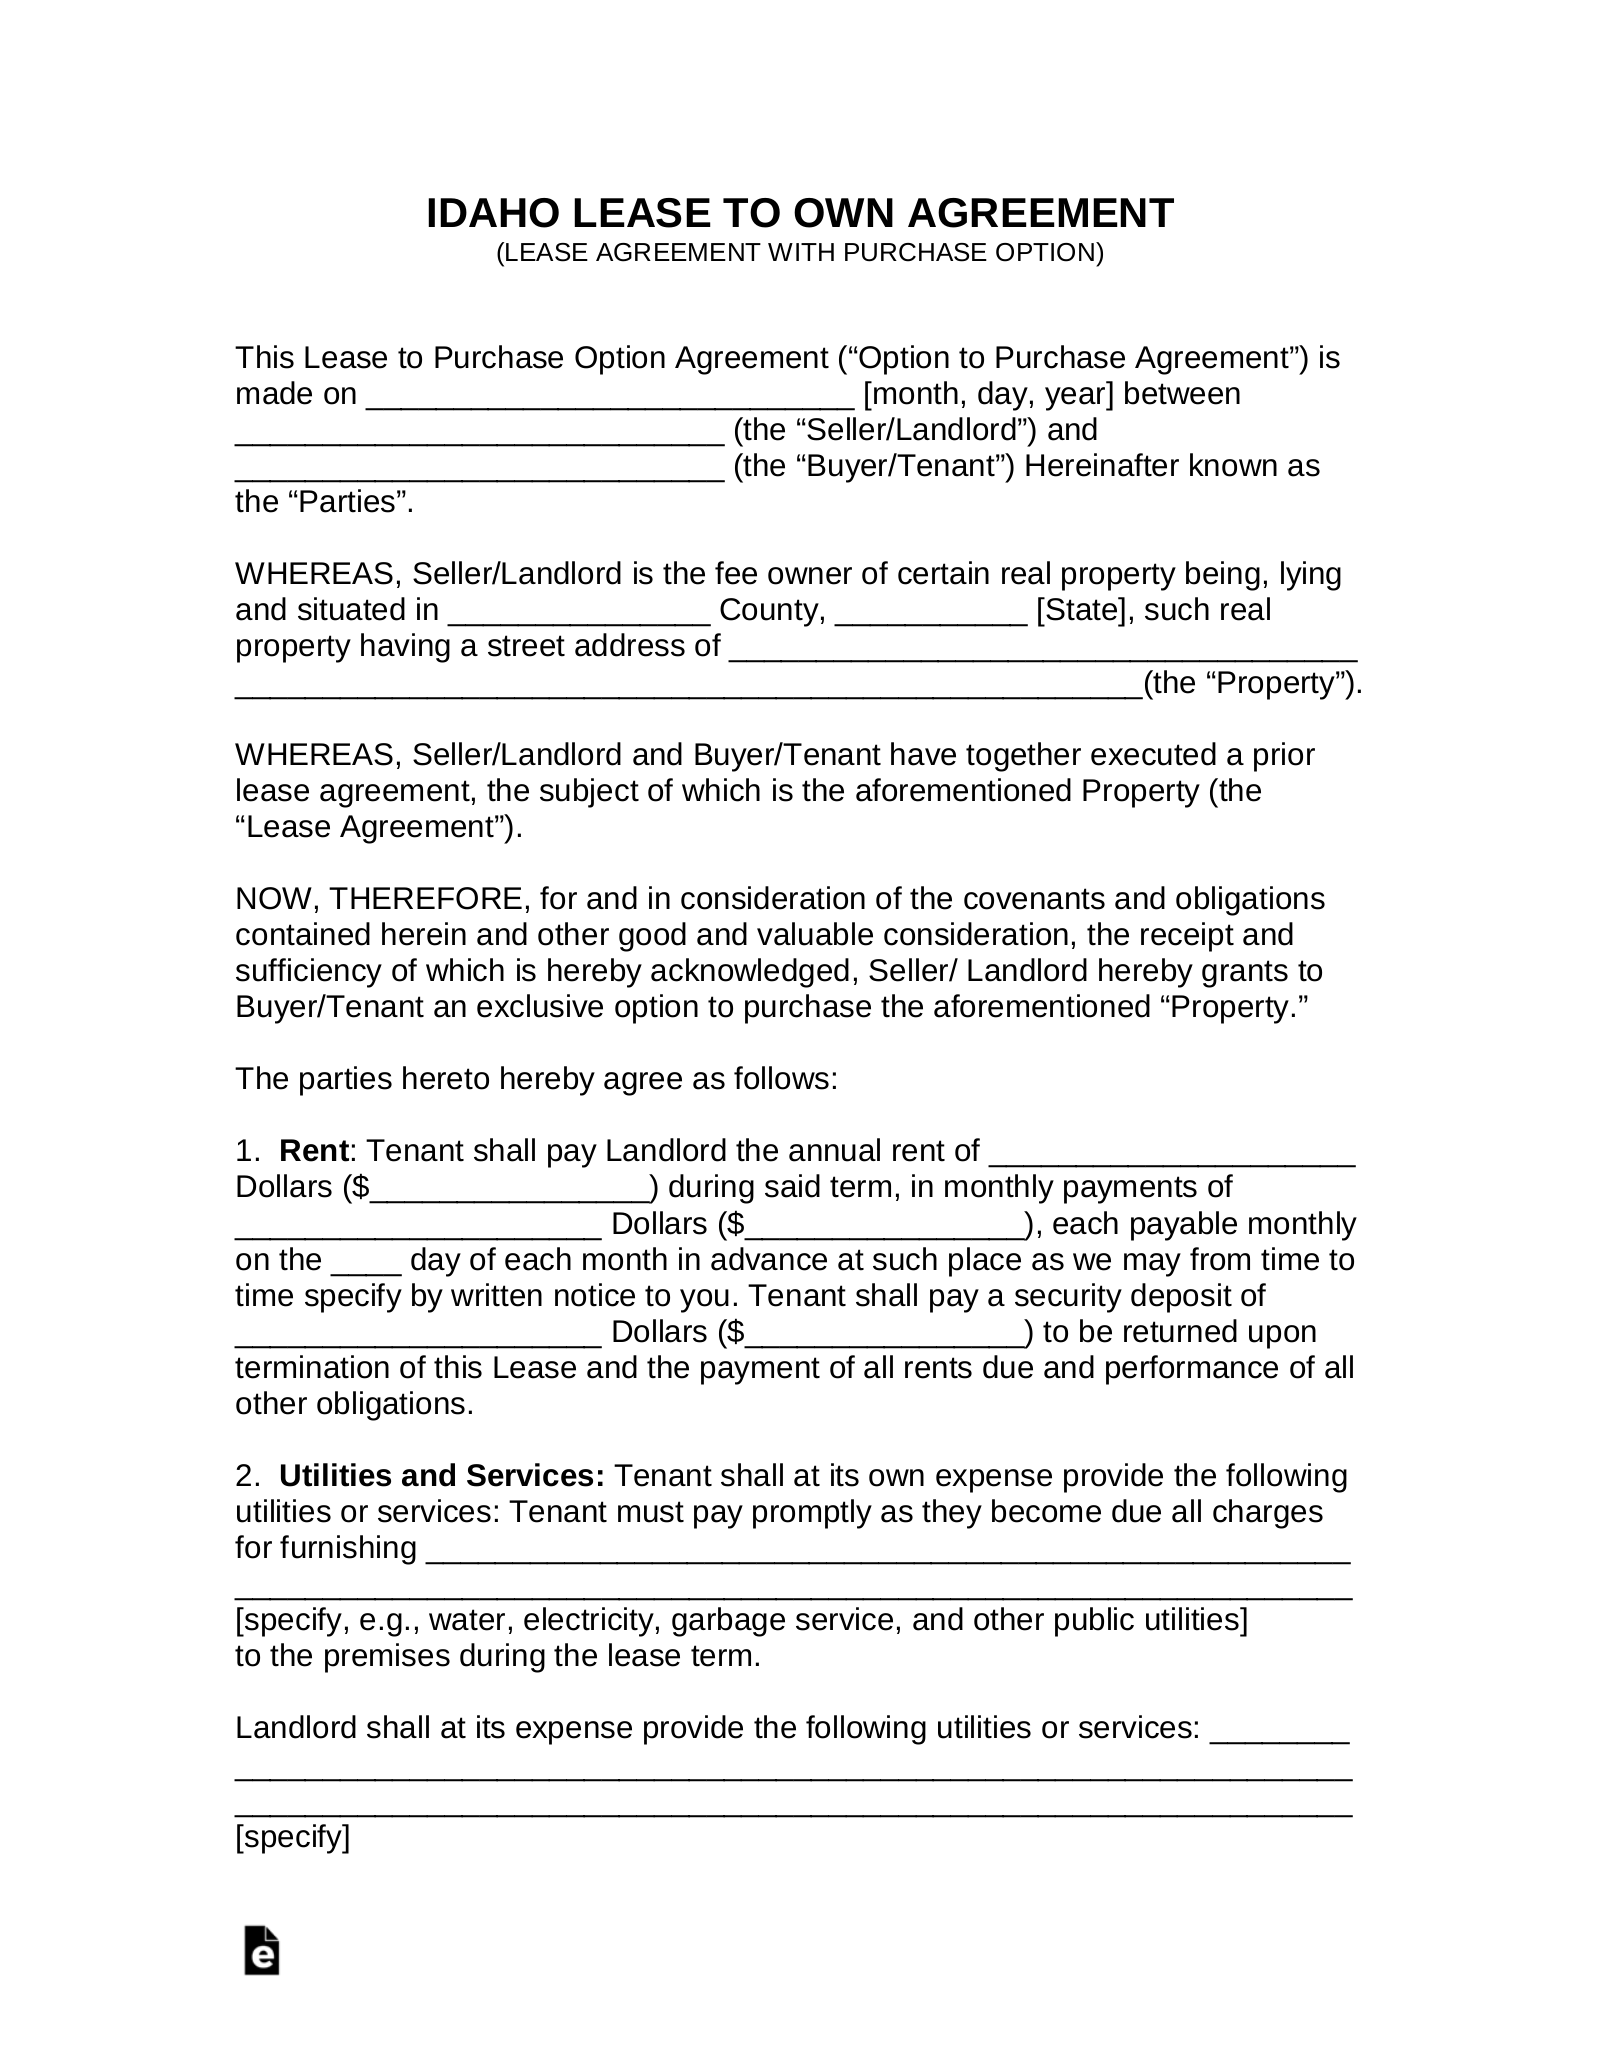 Idaho Rent-to-Own Lease Agreement